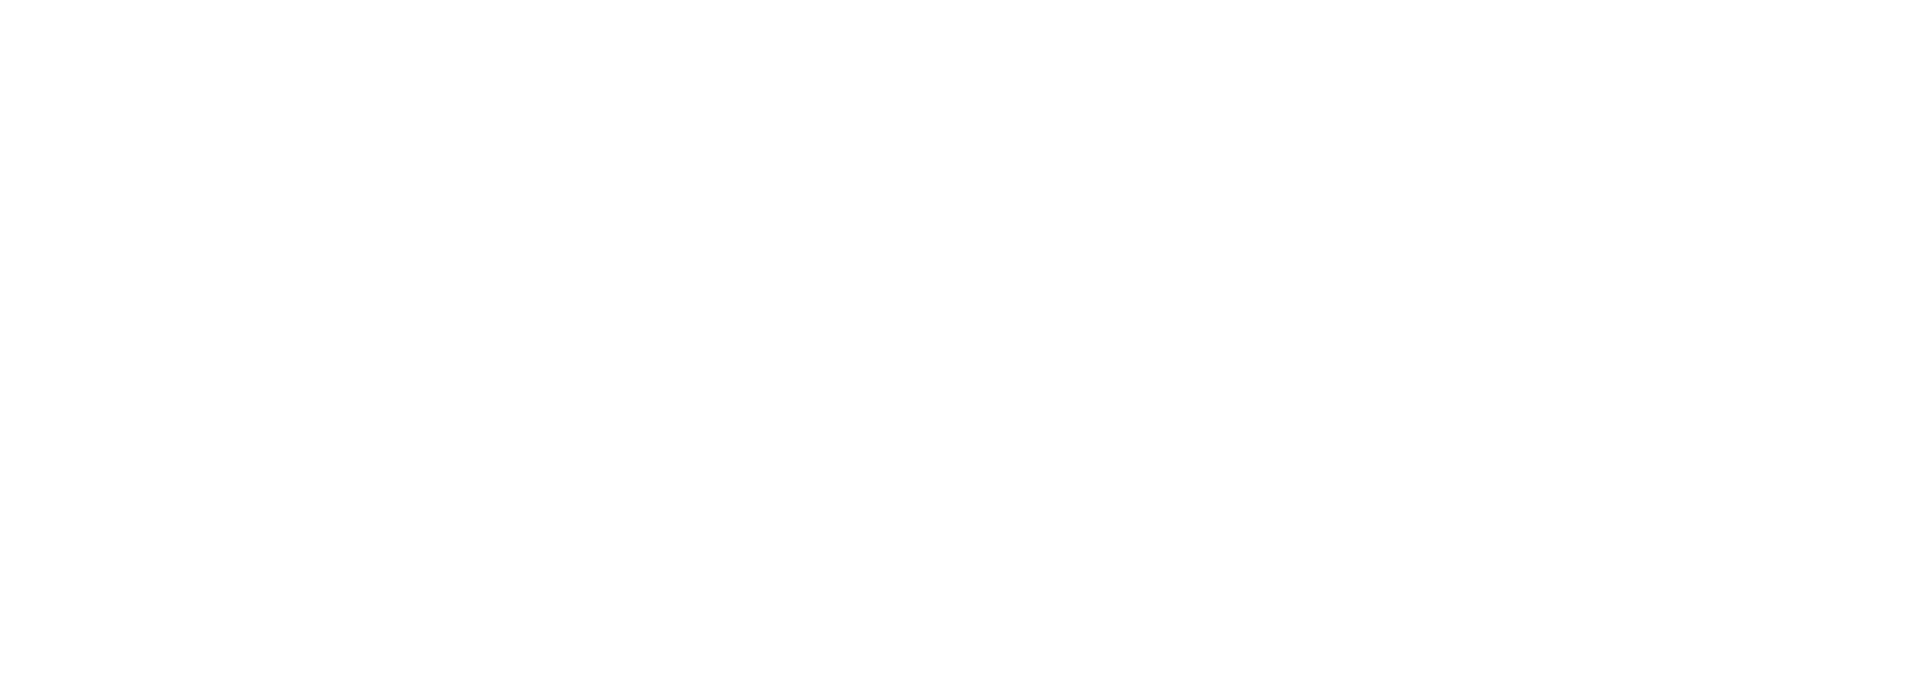 The choice is yours. You decide the clients (and the candidates) you are going to work with.